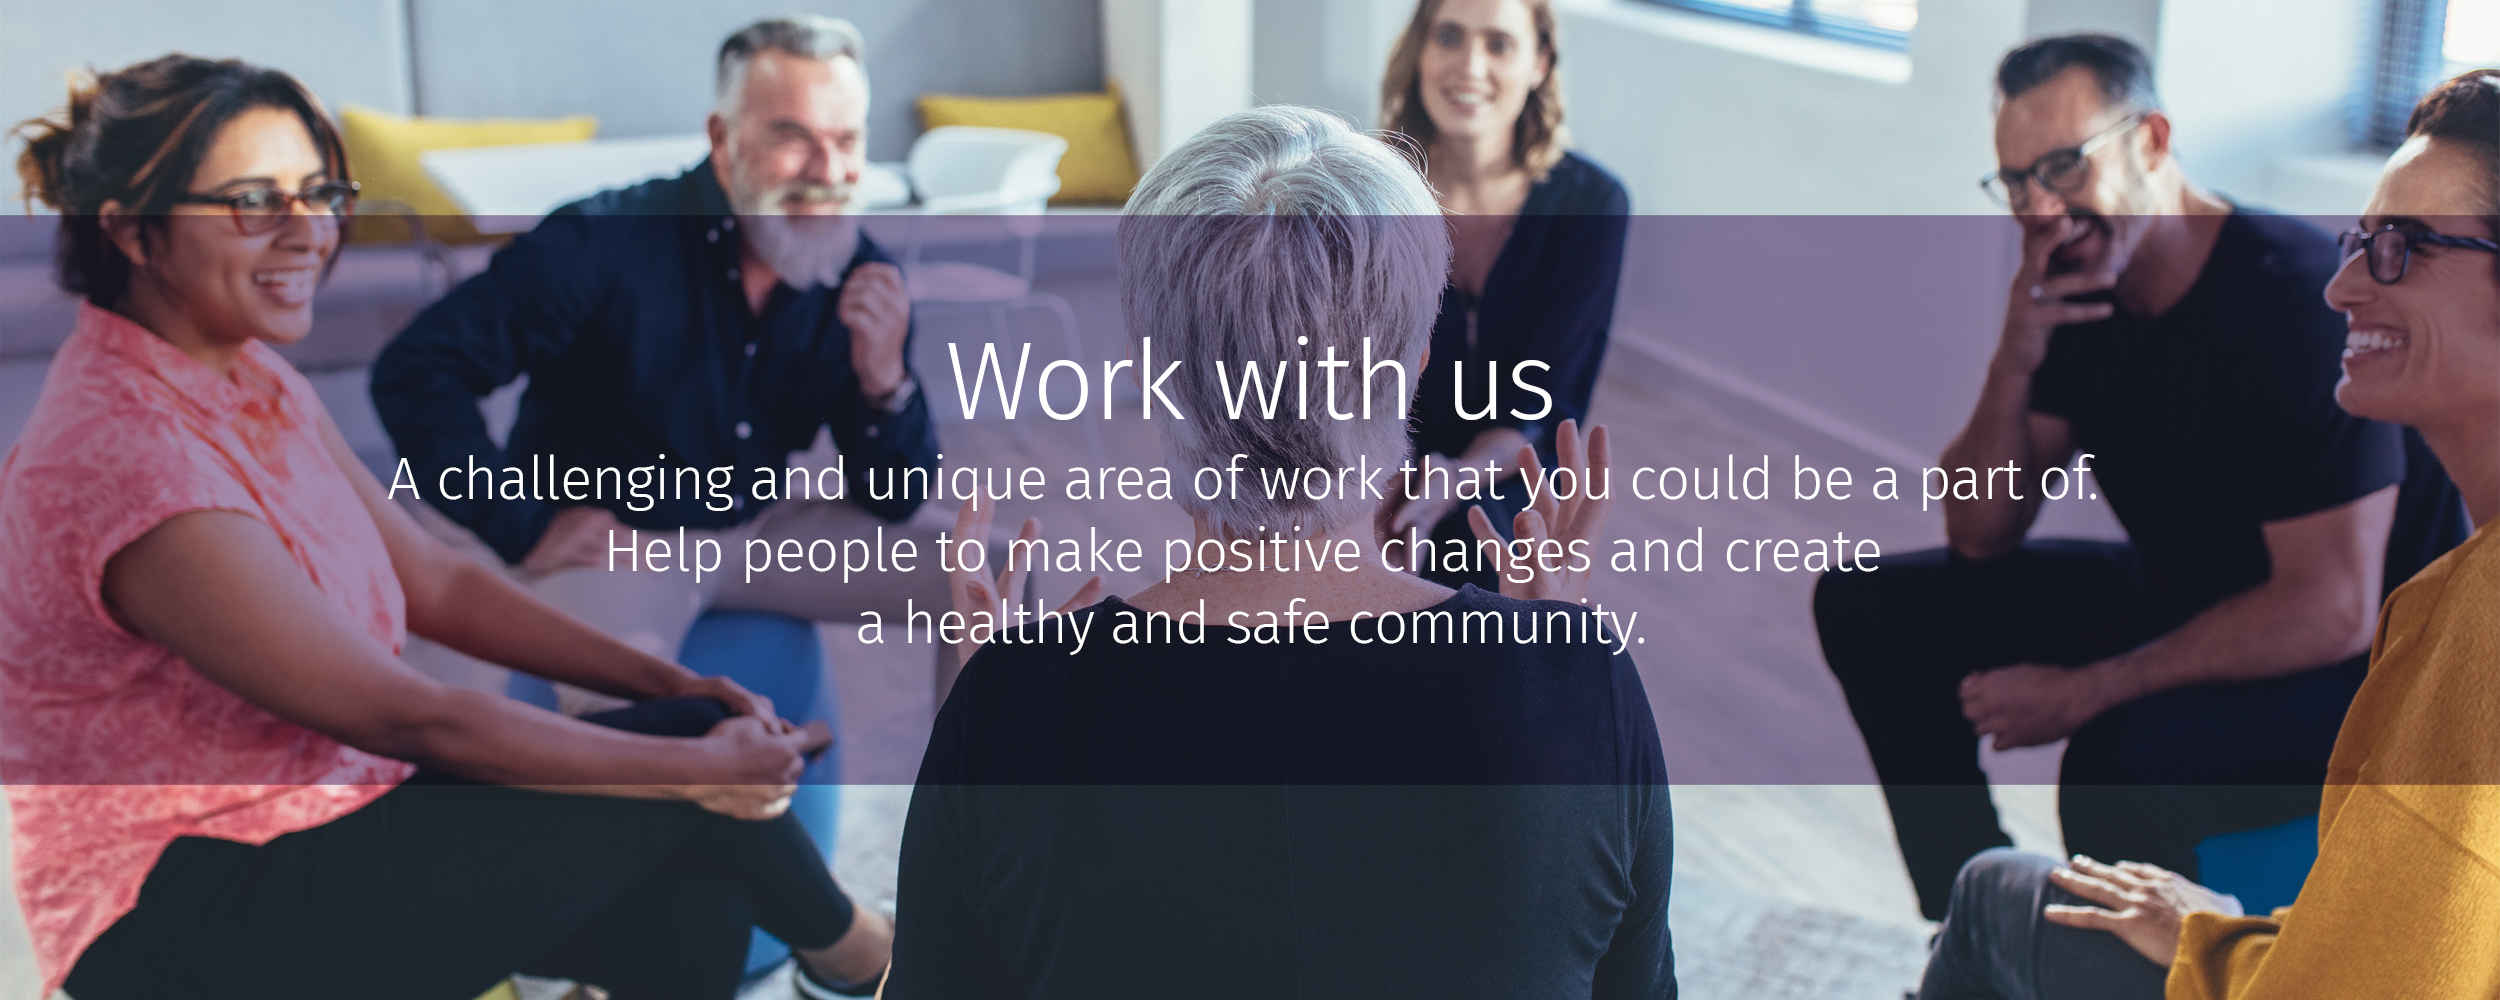 Work with us: A challenging and unique area of work that you could be a part of. Help people to make positive changes and create a healthy and safe community.